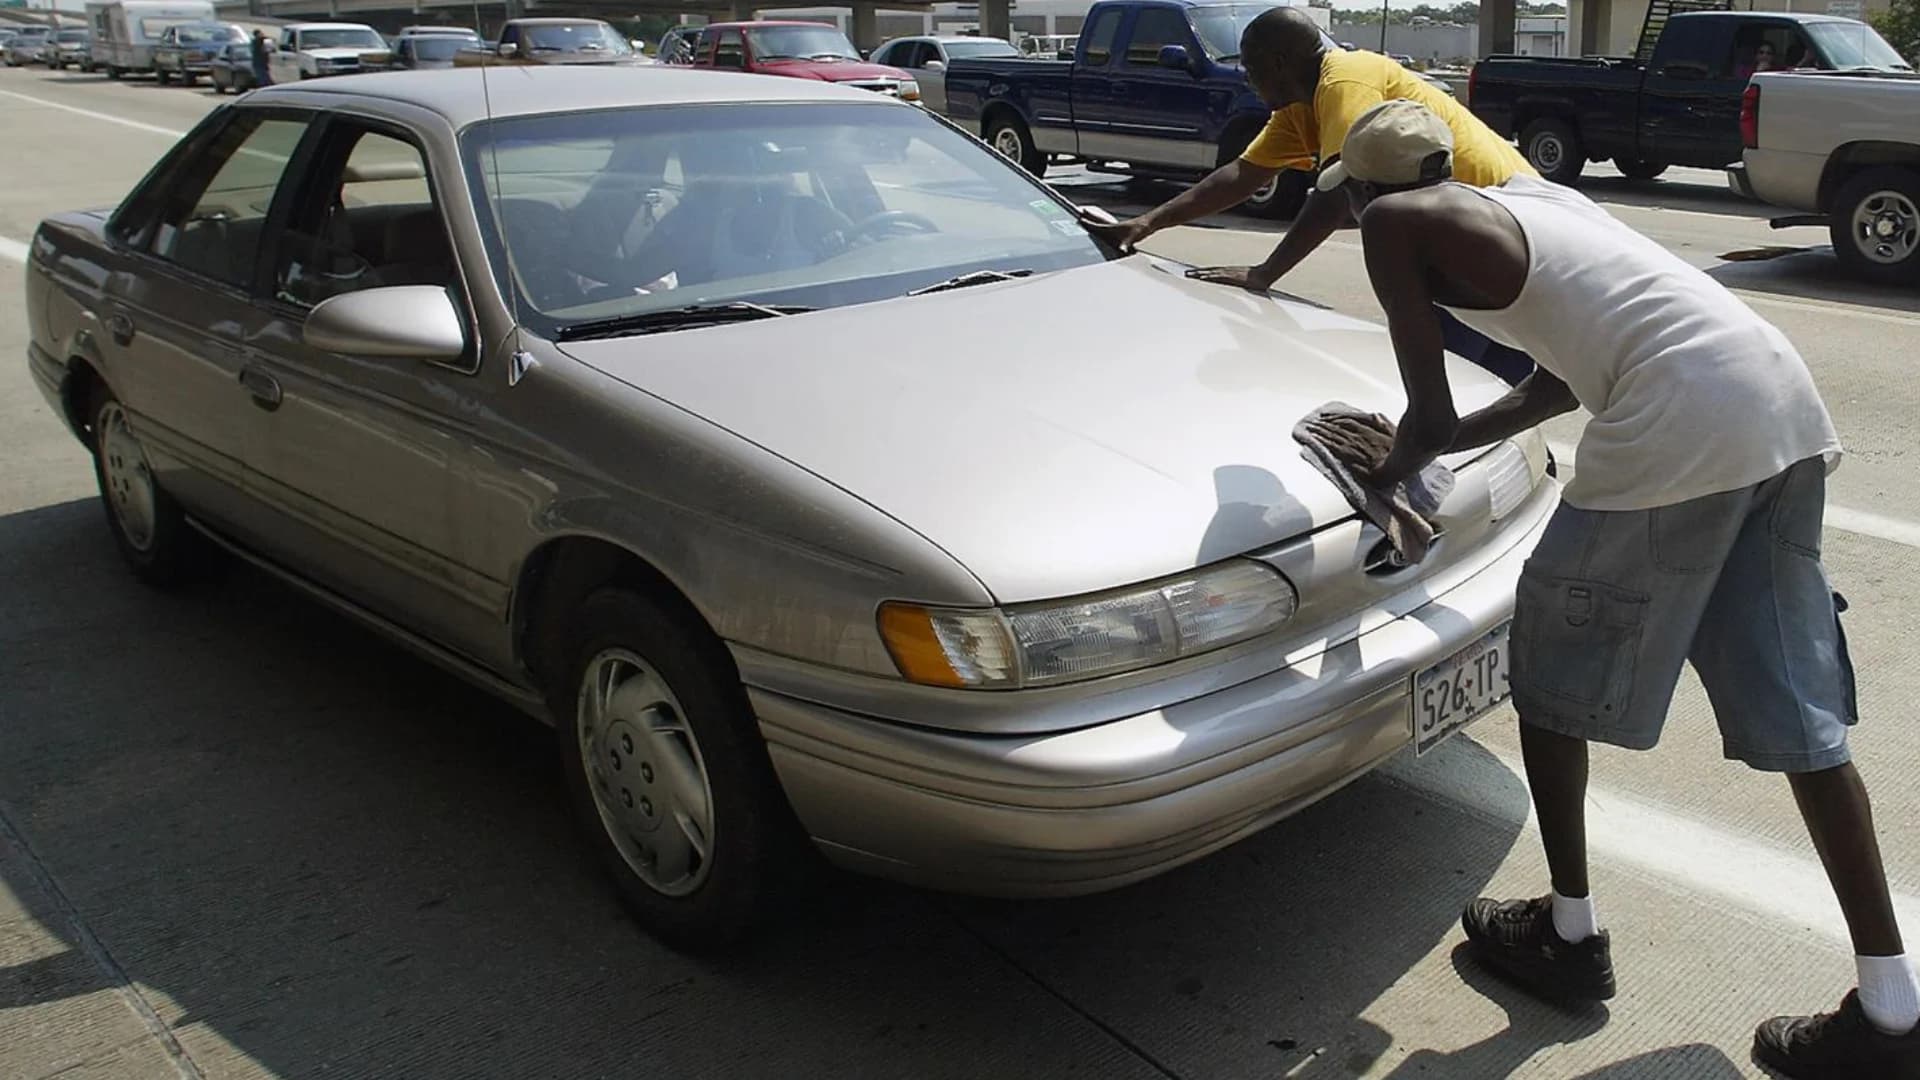 8 things to do when your car breaks down on a roadway